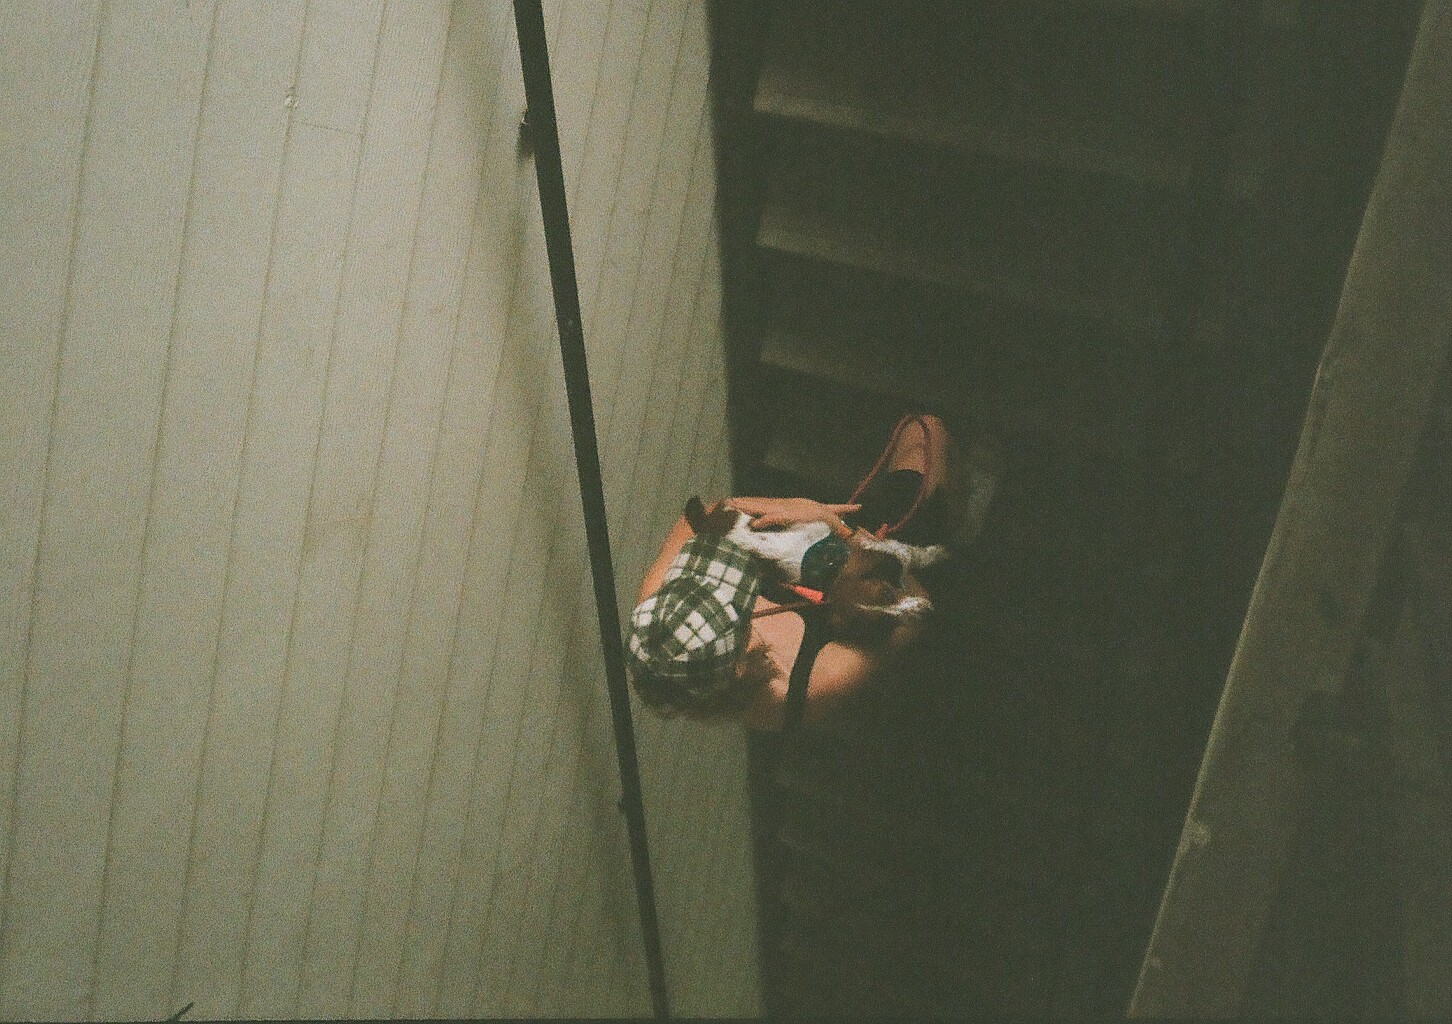 My wife carrying our dog up the staircase